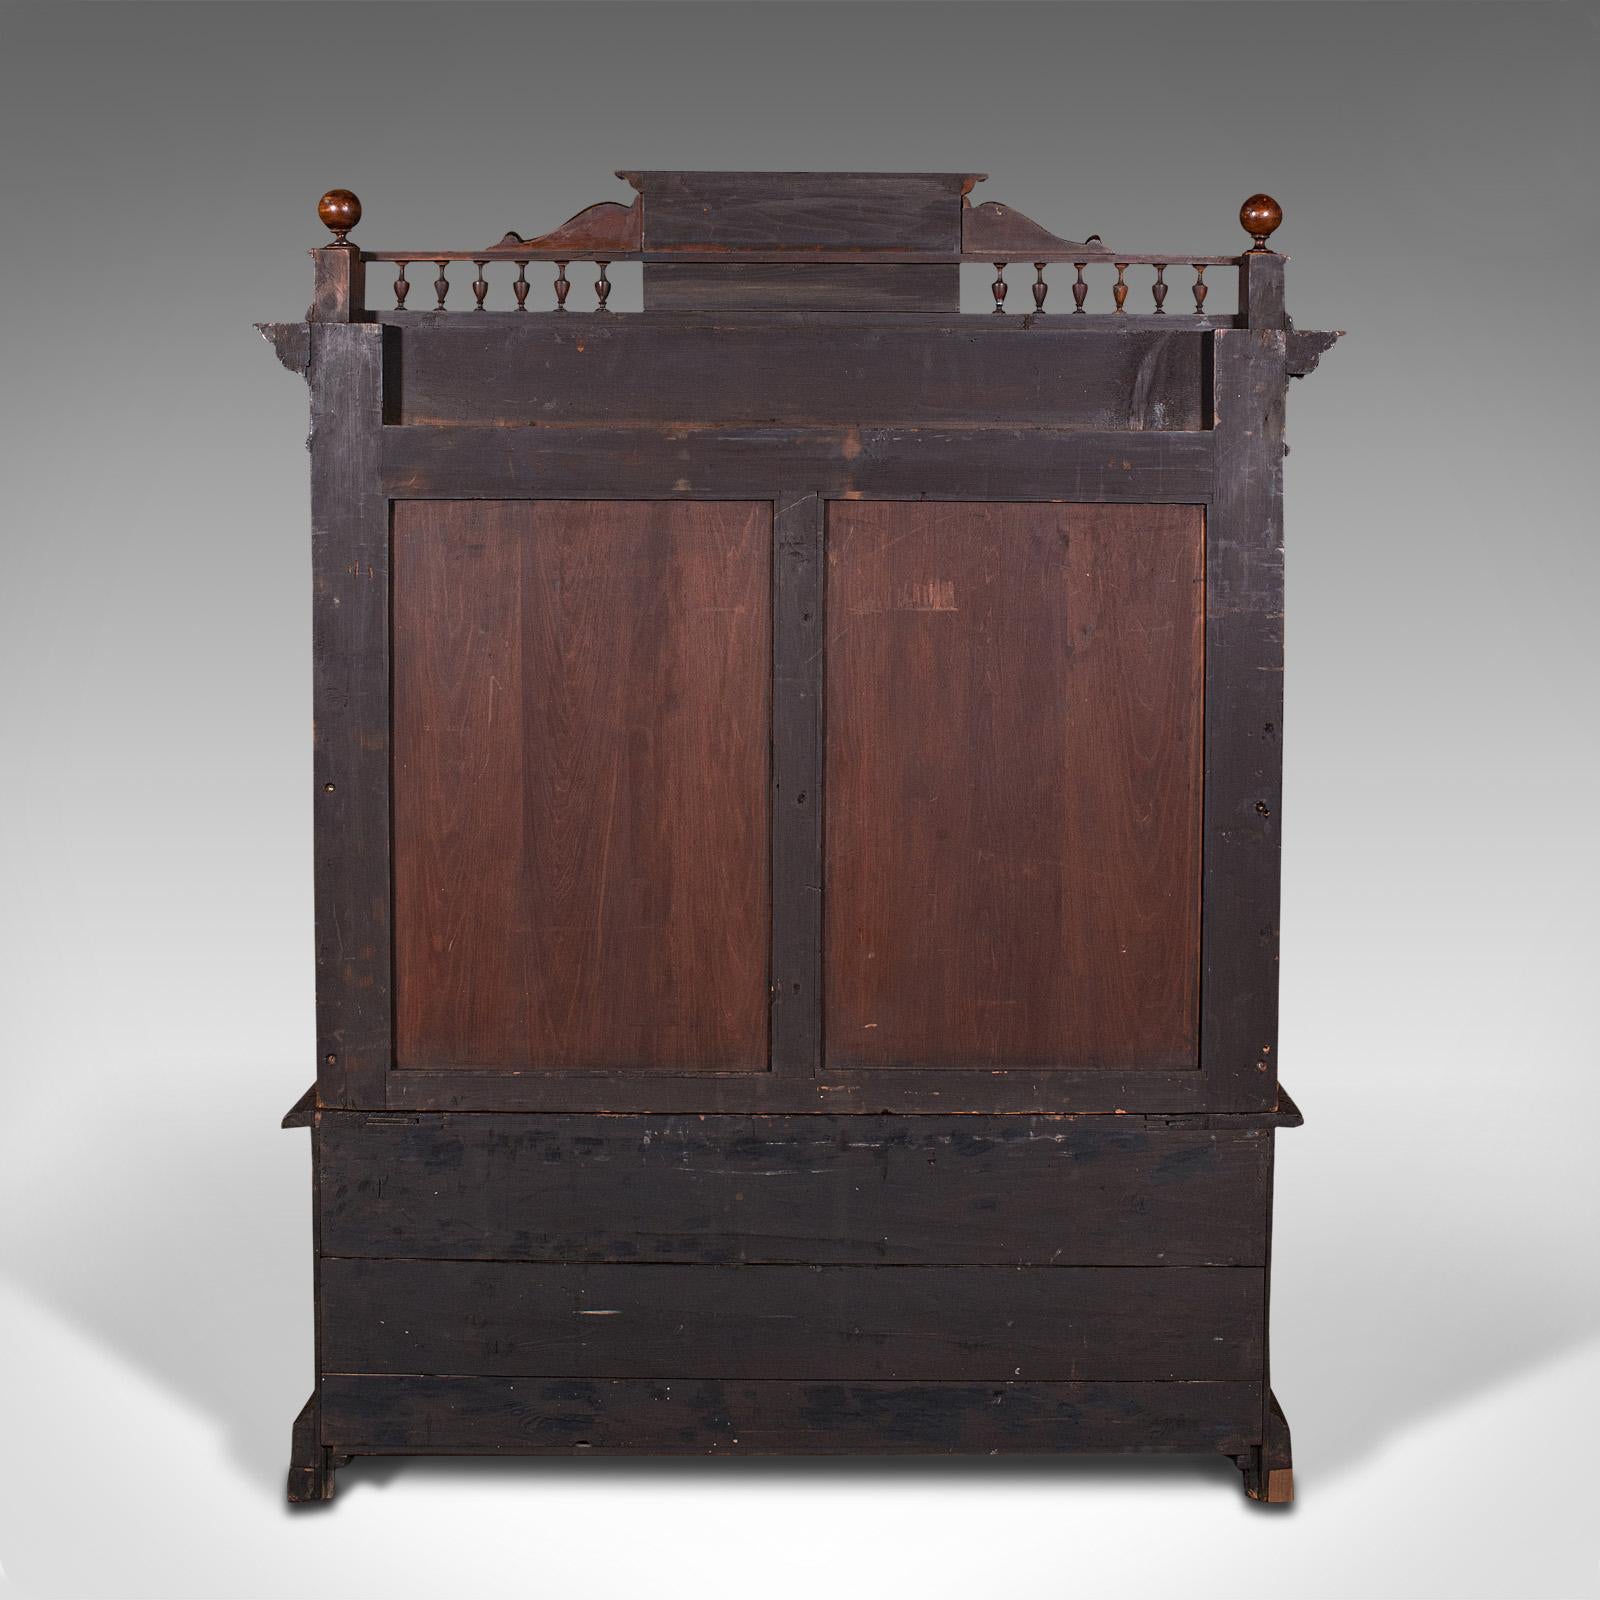 Large Antique Hall Settle, Italian, Pine, Walnut, Bench, Pew, Victorian, C.1850 For Sale 1